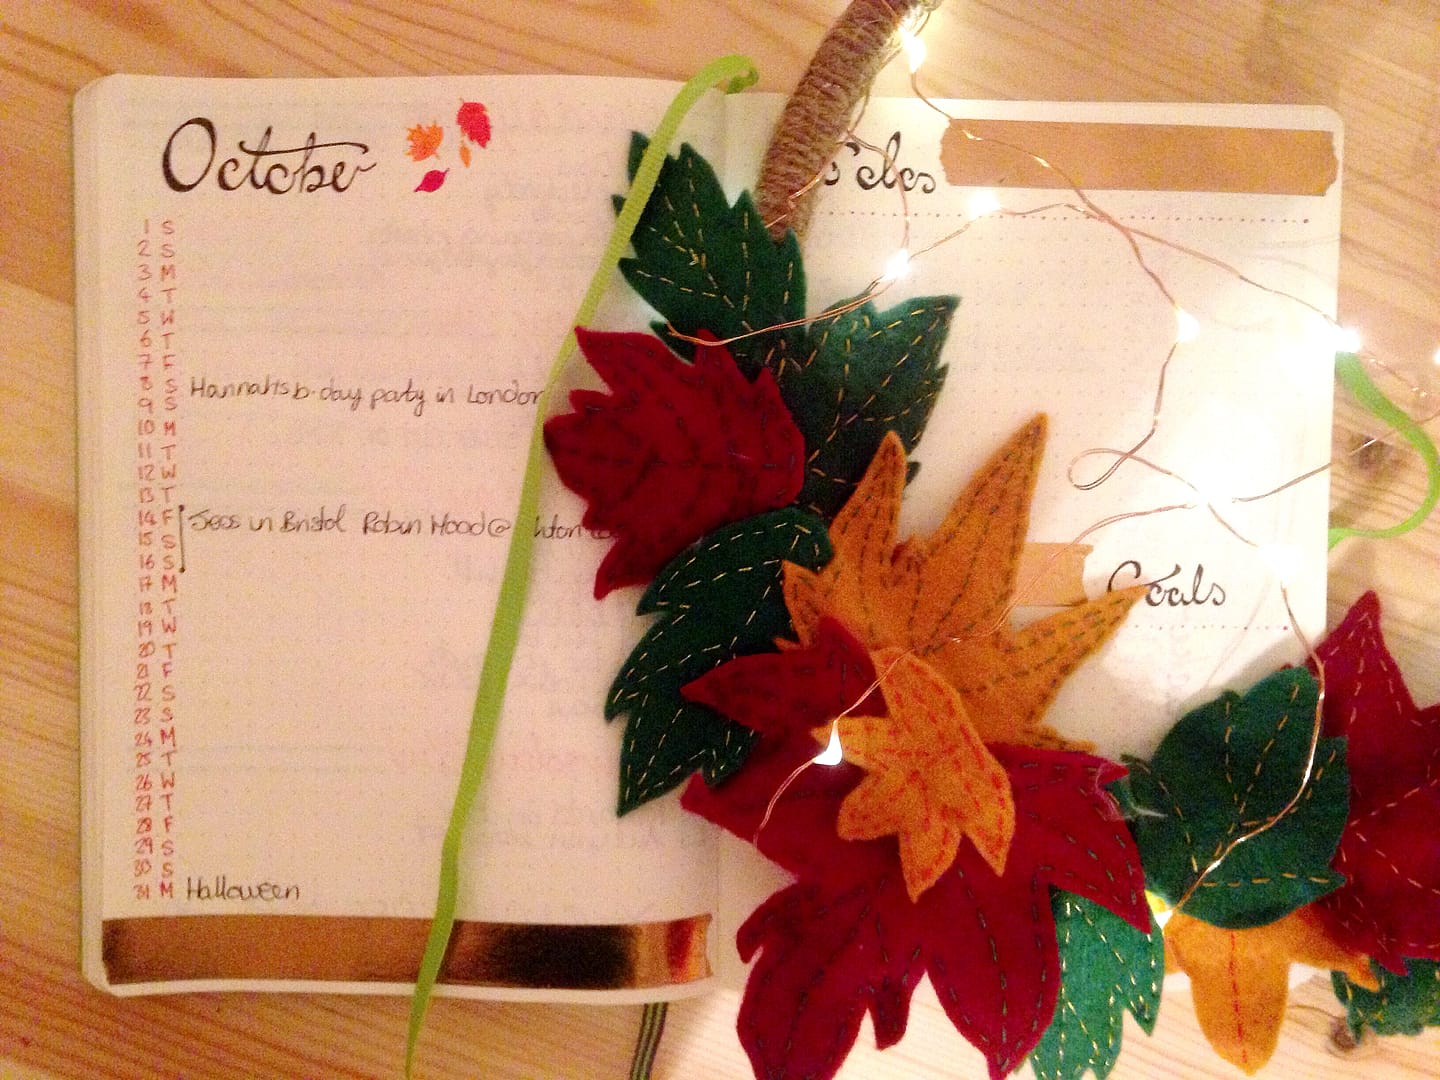 bullet journal autumn update. October's monthly calendar spread with autumnal leaf wreath and fairy lights